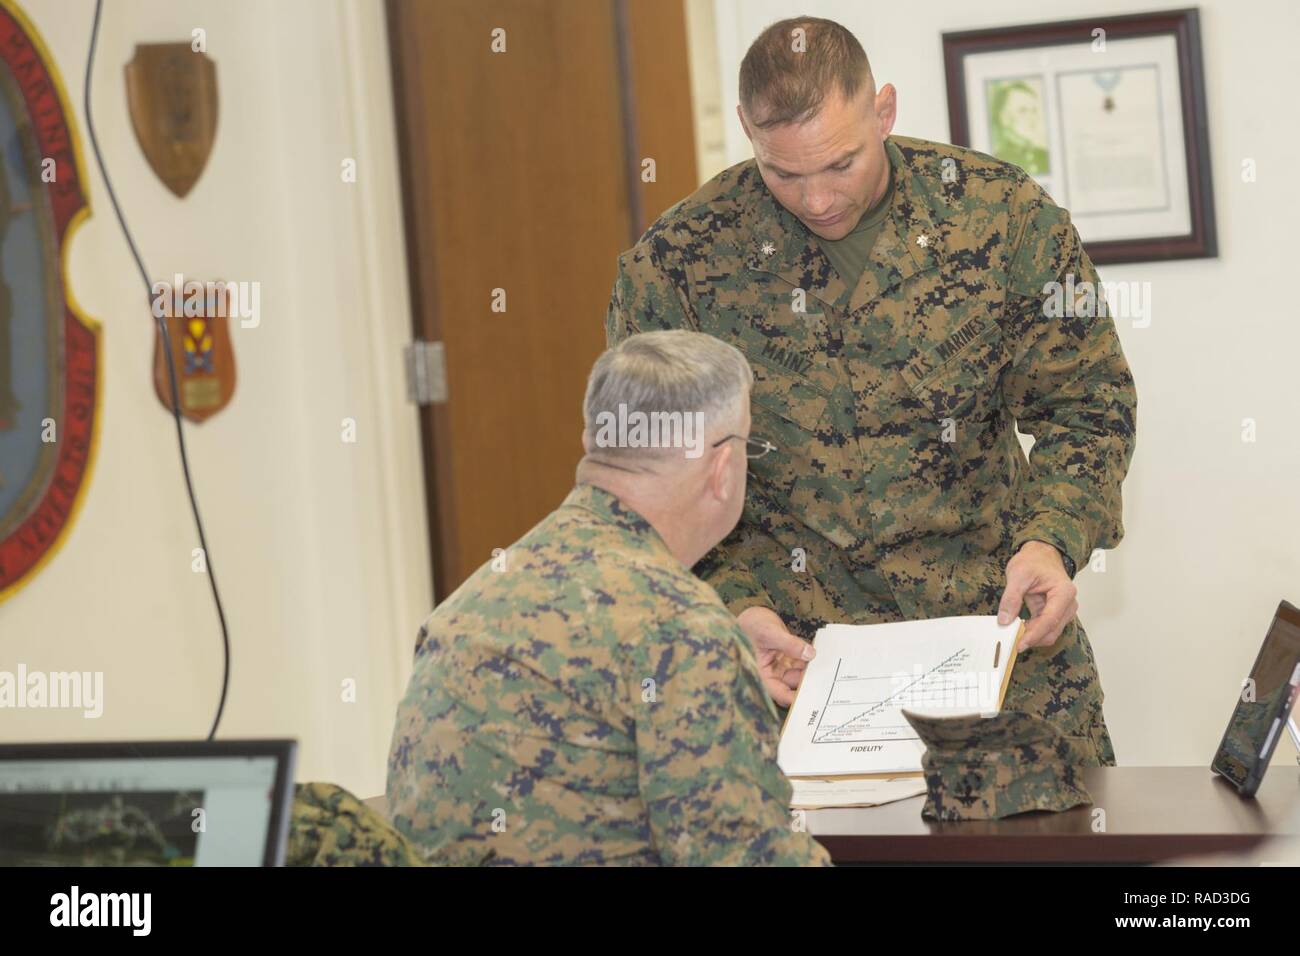 U.S. Marine Corps Lt. Col. Marcus J. Mainz, battalion commander, 2nd Battalion, 6th Marine Regiment, 2nd Marine Division (2d MARDIV), briefs Gen. Glenn Walters the Assistant Commandant of the Marine Corps on simulator training systems during a visit to Camp Lejeune, N.C., Jan. 27, 2017. The purpose of the visit was to increase awareness and capabilities of ground simulation and simulator training systems in support of operational forces combat readiness. Stock Photo